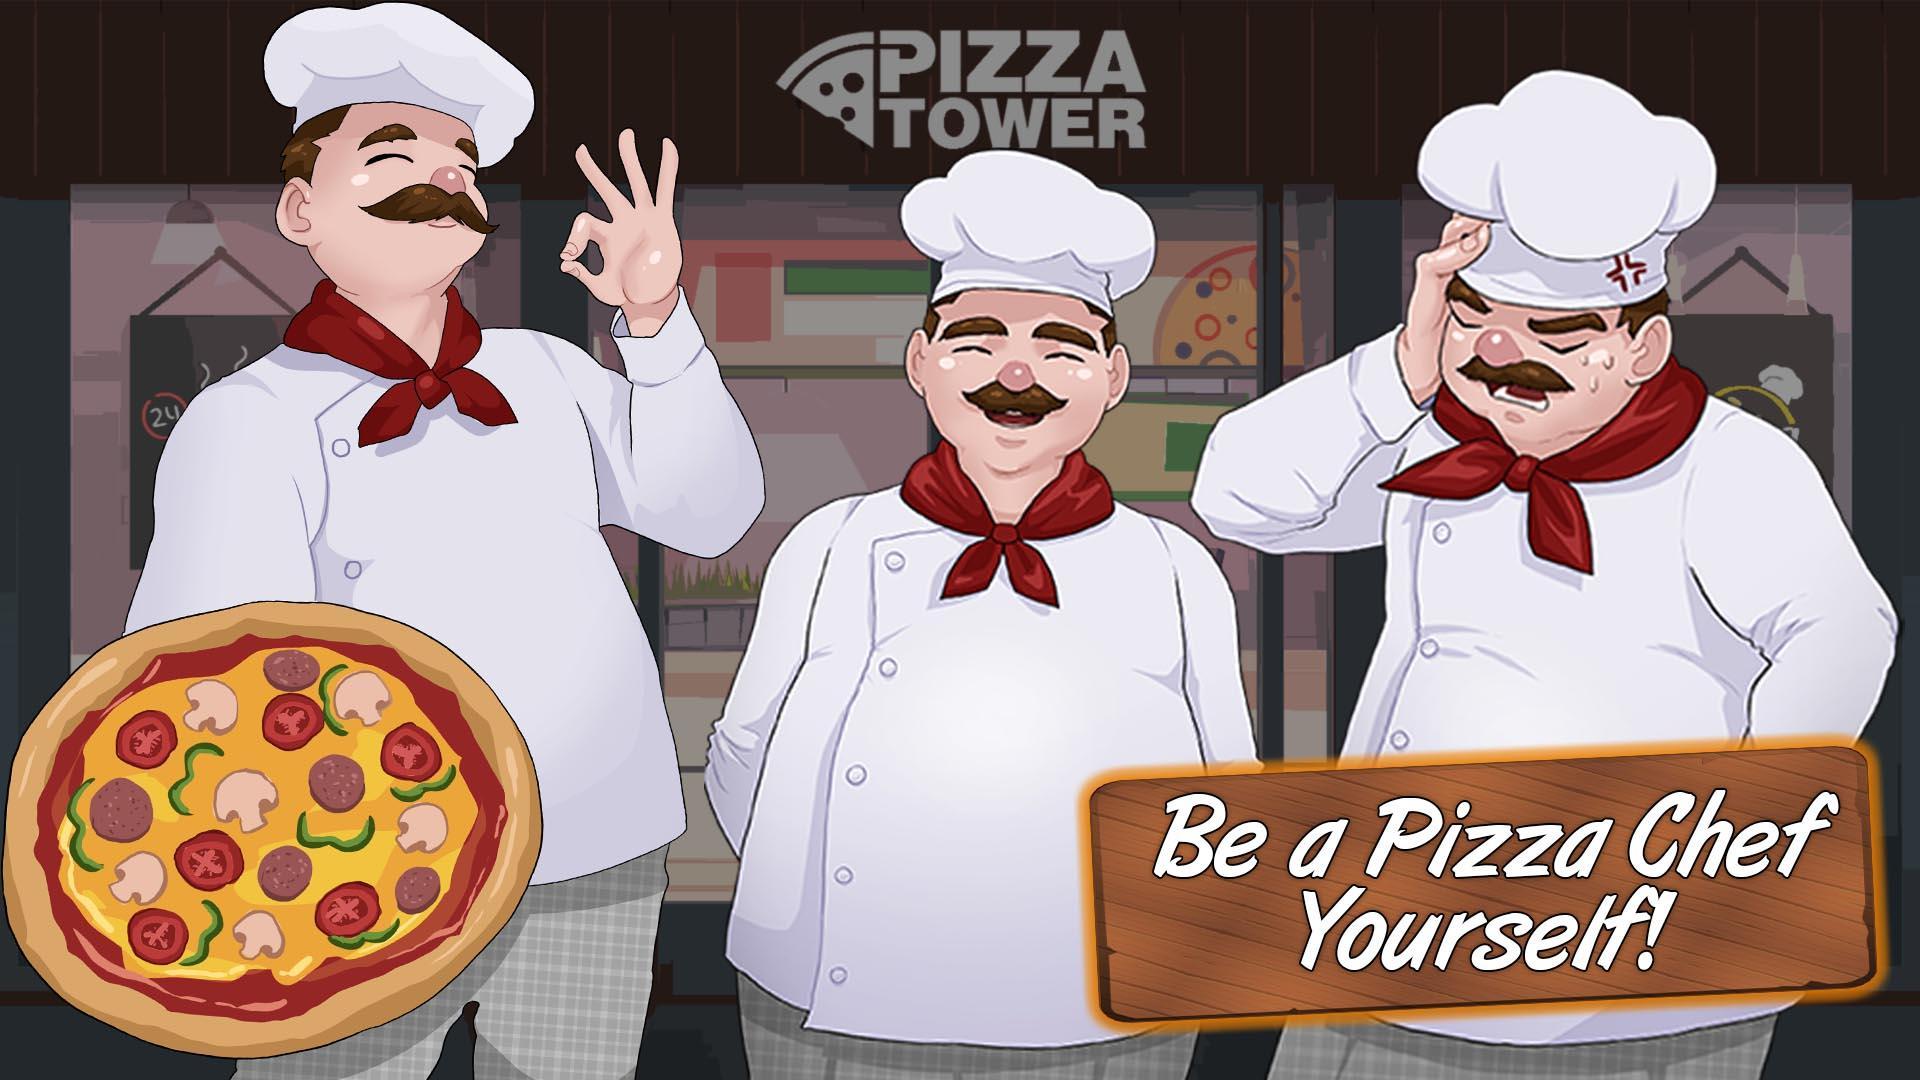 Pizza tower 1.1 063. Pizza Tower игра. Шеф повар pizza Tower. Пицца ТАВЕР мемы. Peppino pizza Tower.